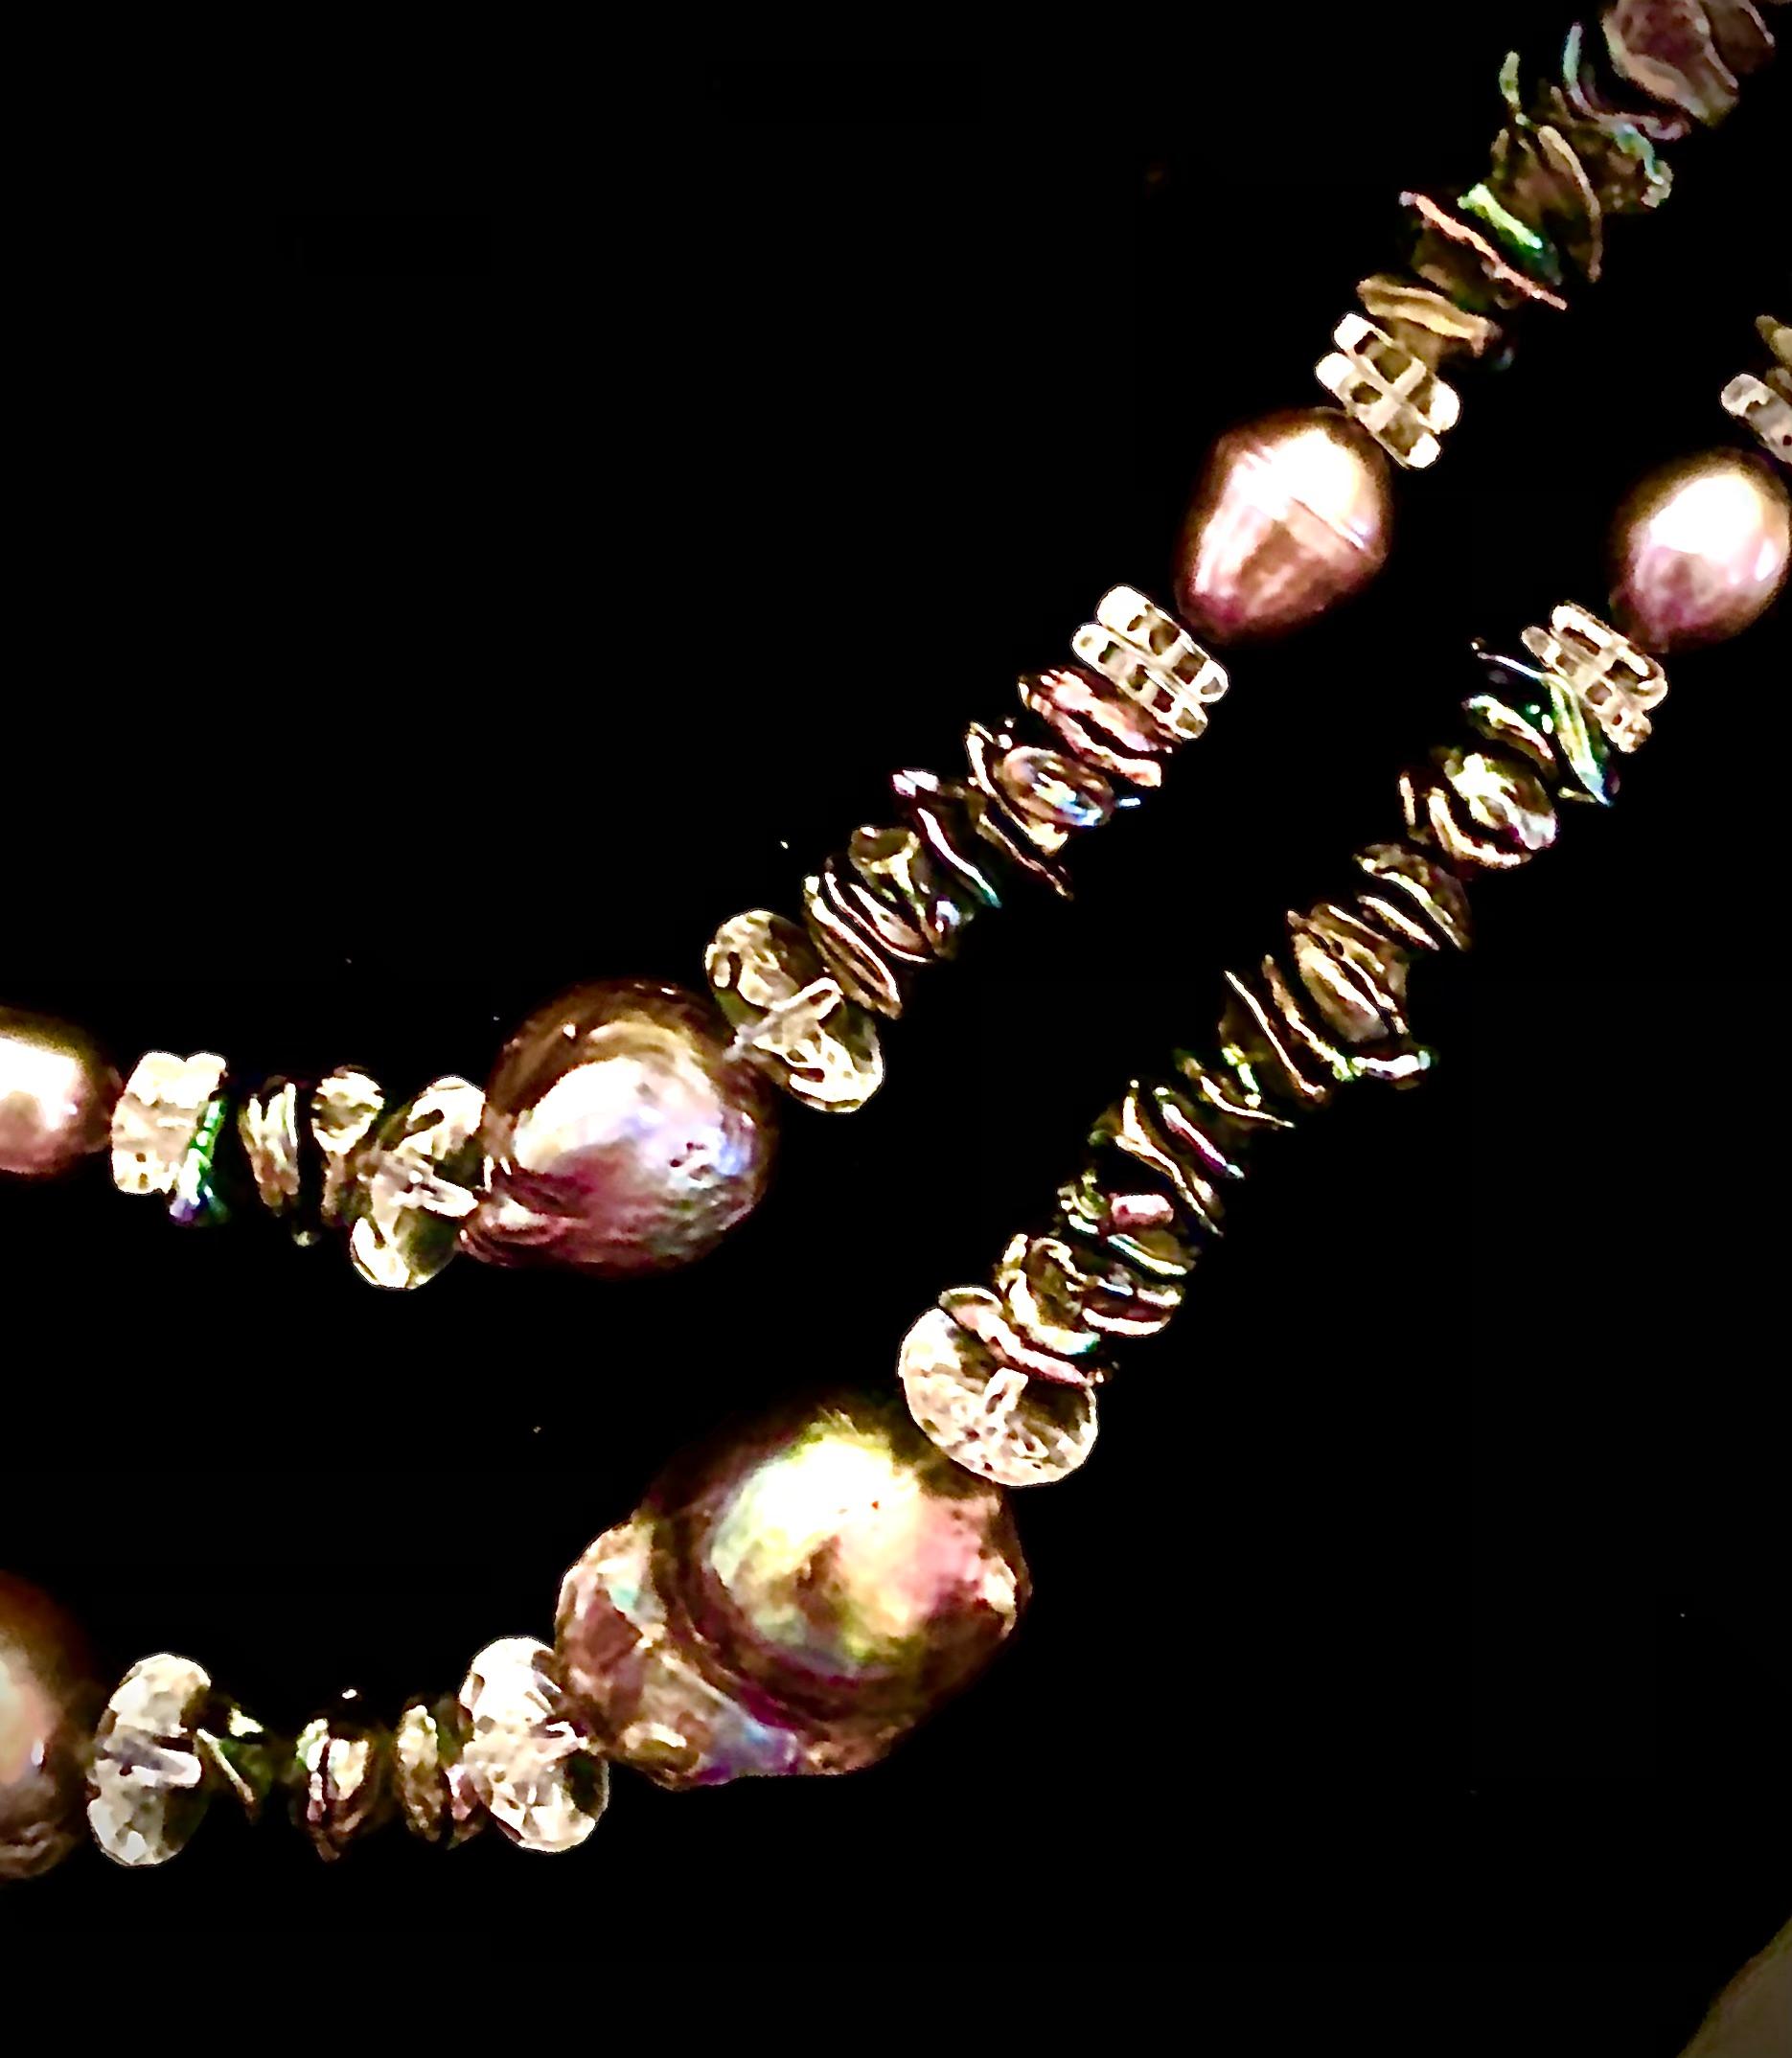 Stunning and unique double necklace. Longer composed of peacock baroque pearls measuring from approximately 22mm to over 25mm. These pearls have intense green, mauve and purple overtones. The large pearls are flanked with 10mm rock crystal faceted